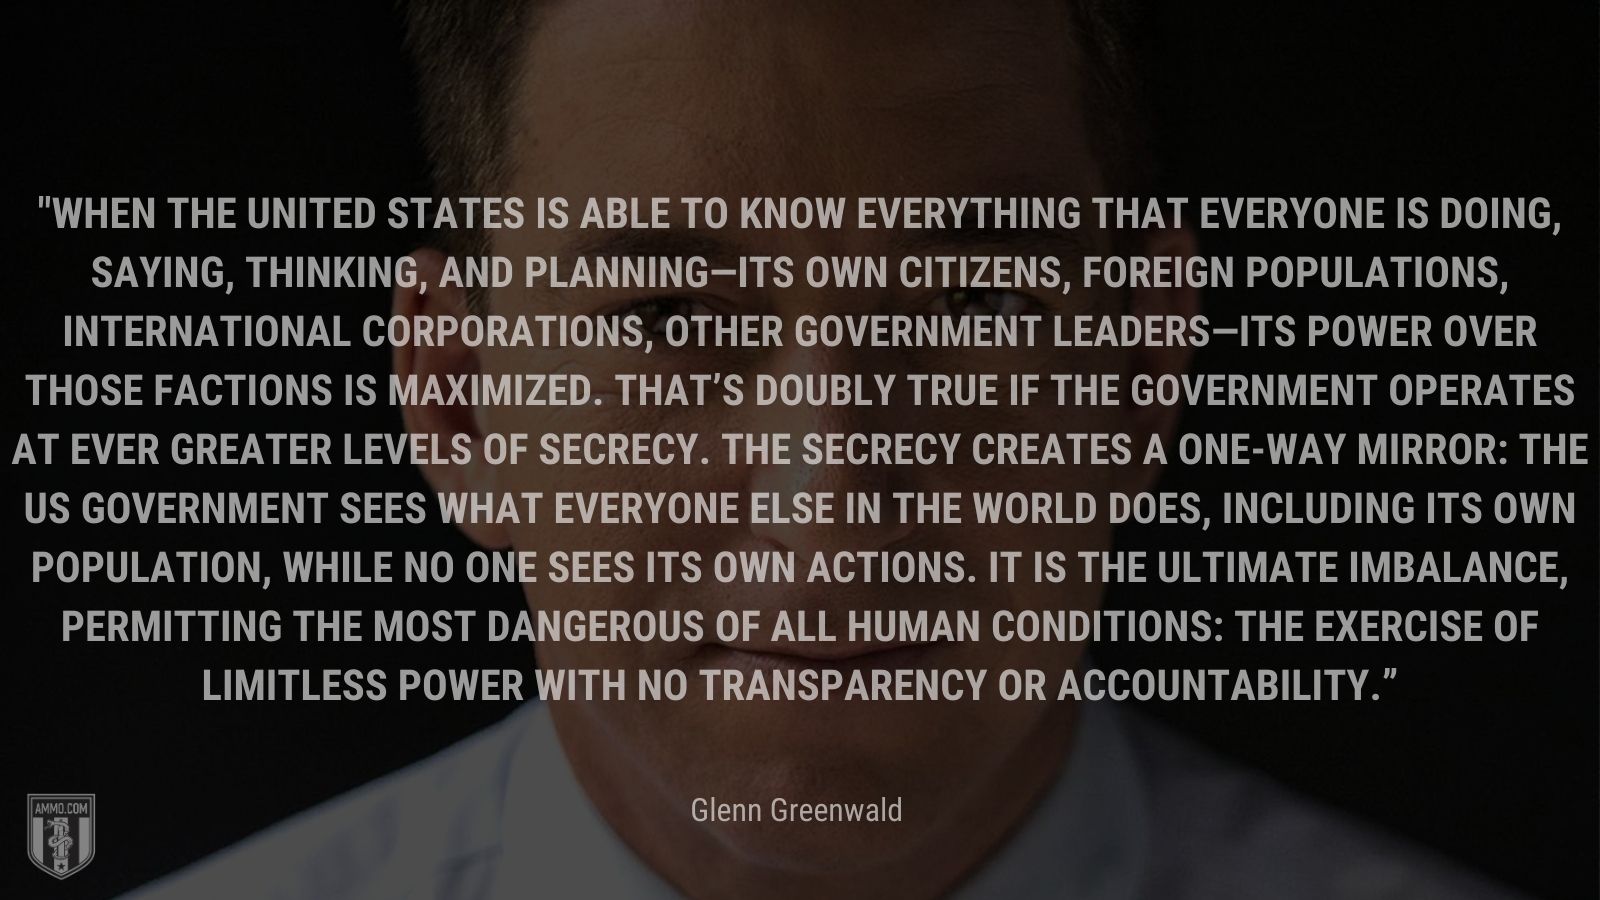 “When the United States is able to know everything that everyone is doing, saying, thinking, and planning—its own citizens, foreign populations, international corporations, other government leaders—its power over those factions is maximized. That’s doubly true if the government operates at ever greater levels of secrecy. The secrecy creates a one-way mirror: the US government sees what everyone else in the world does, including its own population, while no one sees its own actions. It is the ultimate imbalance, permitting the most dangerous of all human conditions: the exercise of limitless power with no transparency or accountability.” - Glenn Greenwald